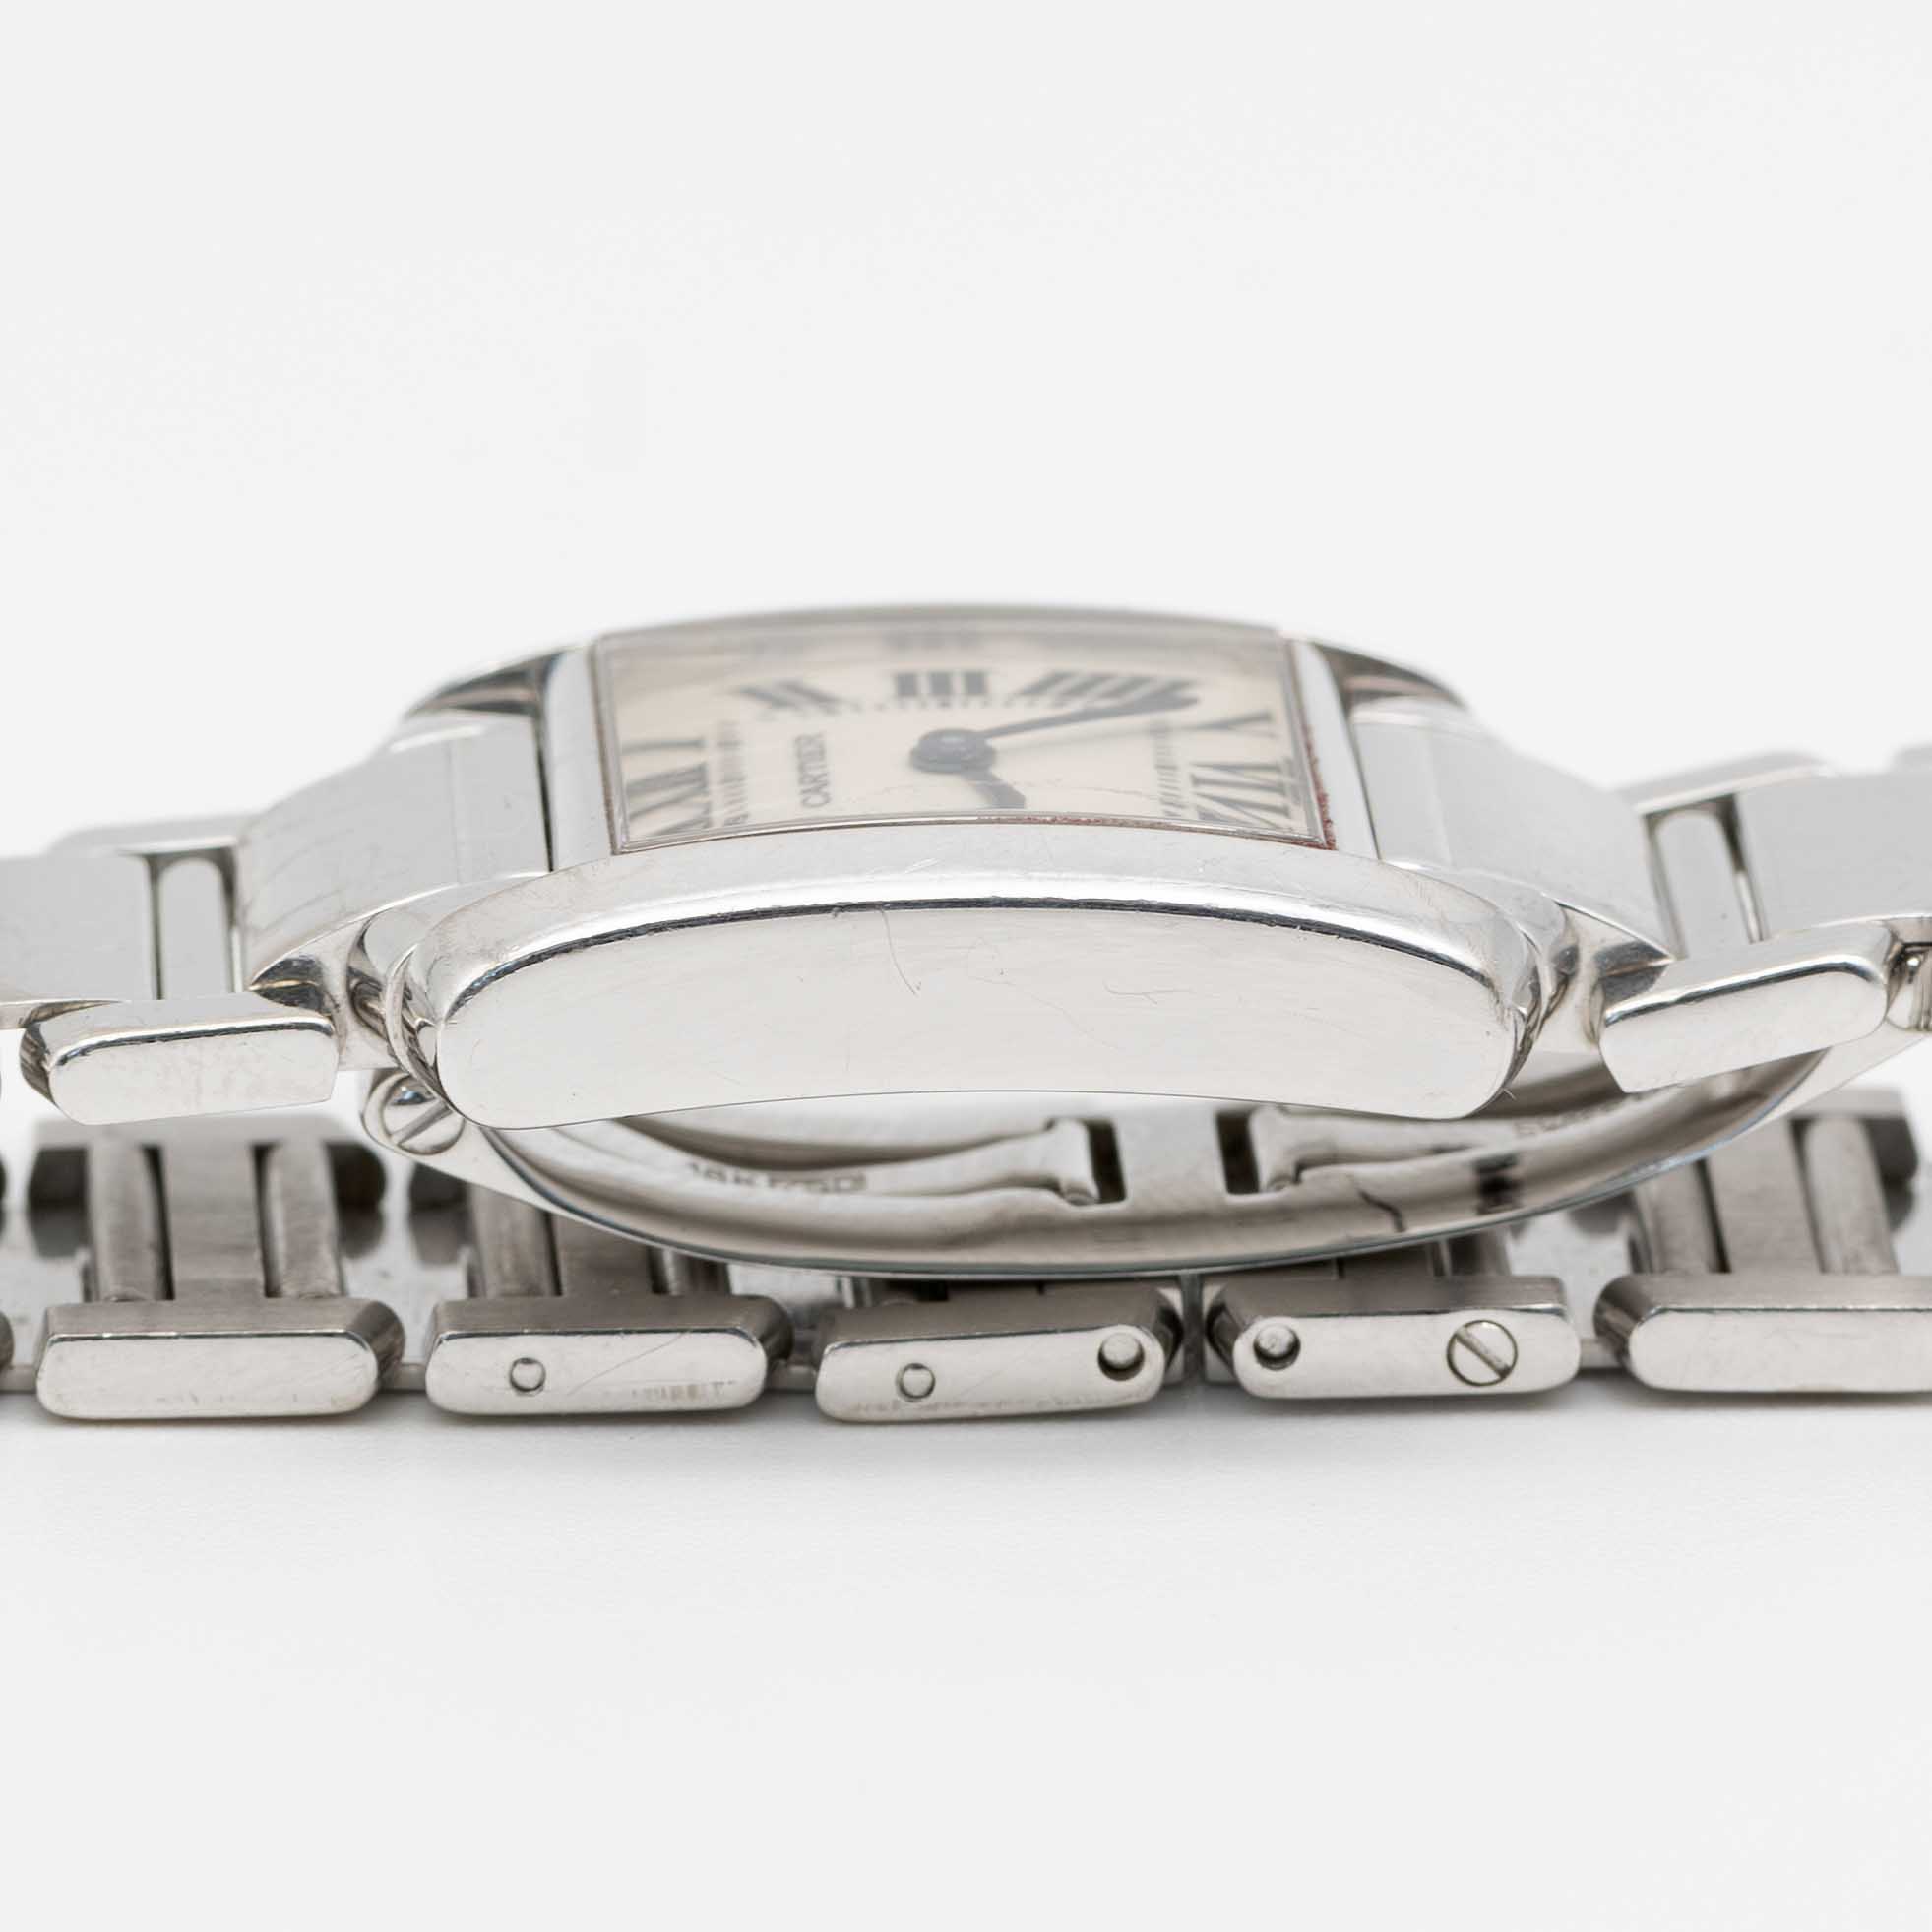 A LADIES 18K SOLID WHITE GOLD CARTIER TANK FRANCAISE BRACELET WATCH CIRCA 2005, REF. 2403 - Image 9 of 9